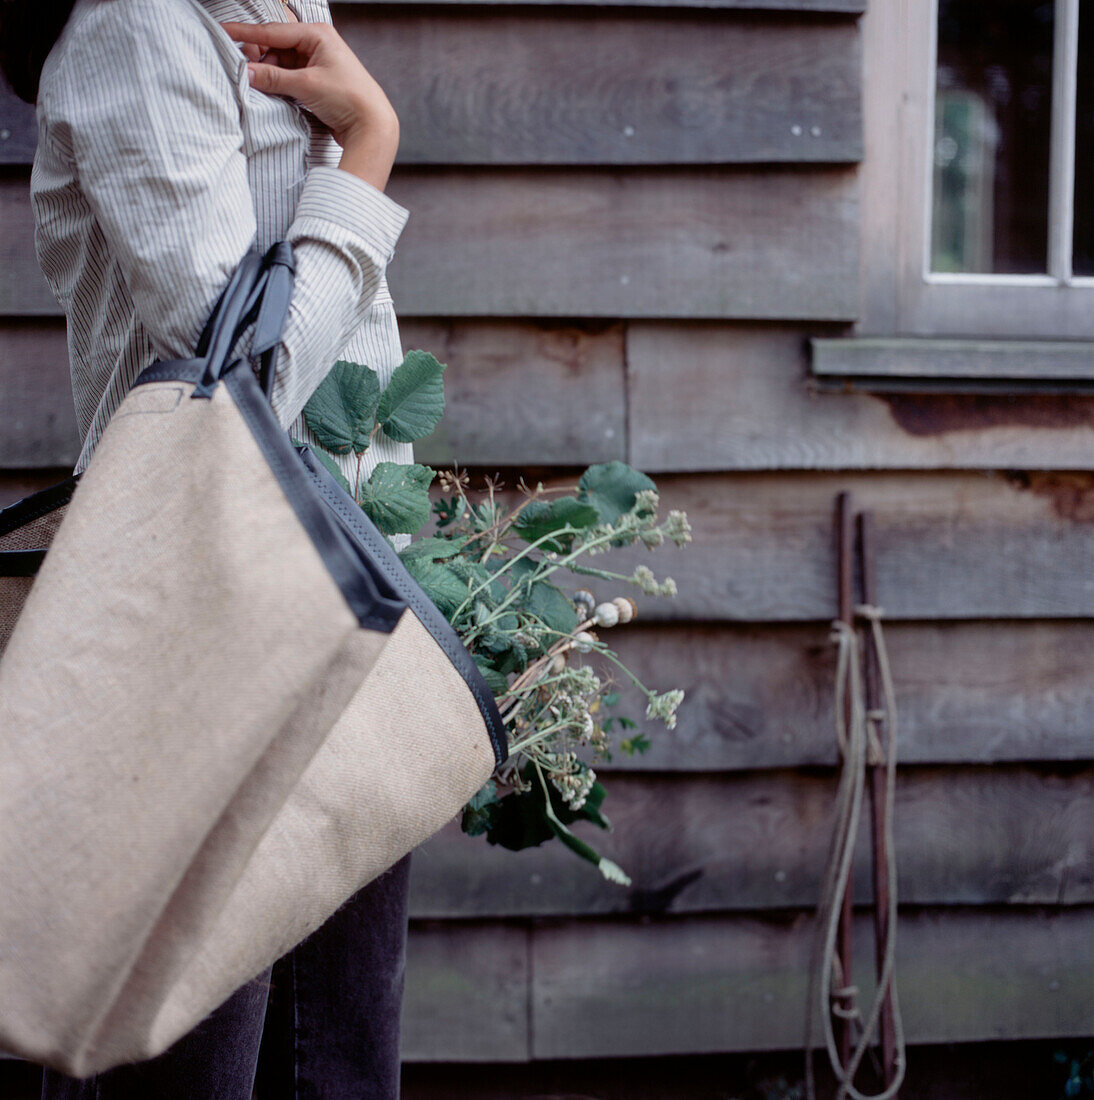 Woman removing garden waster in a canvas bag